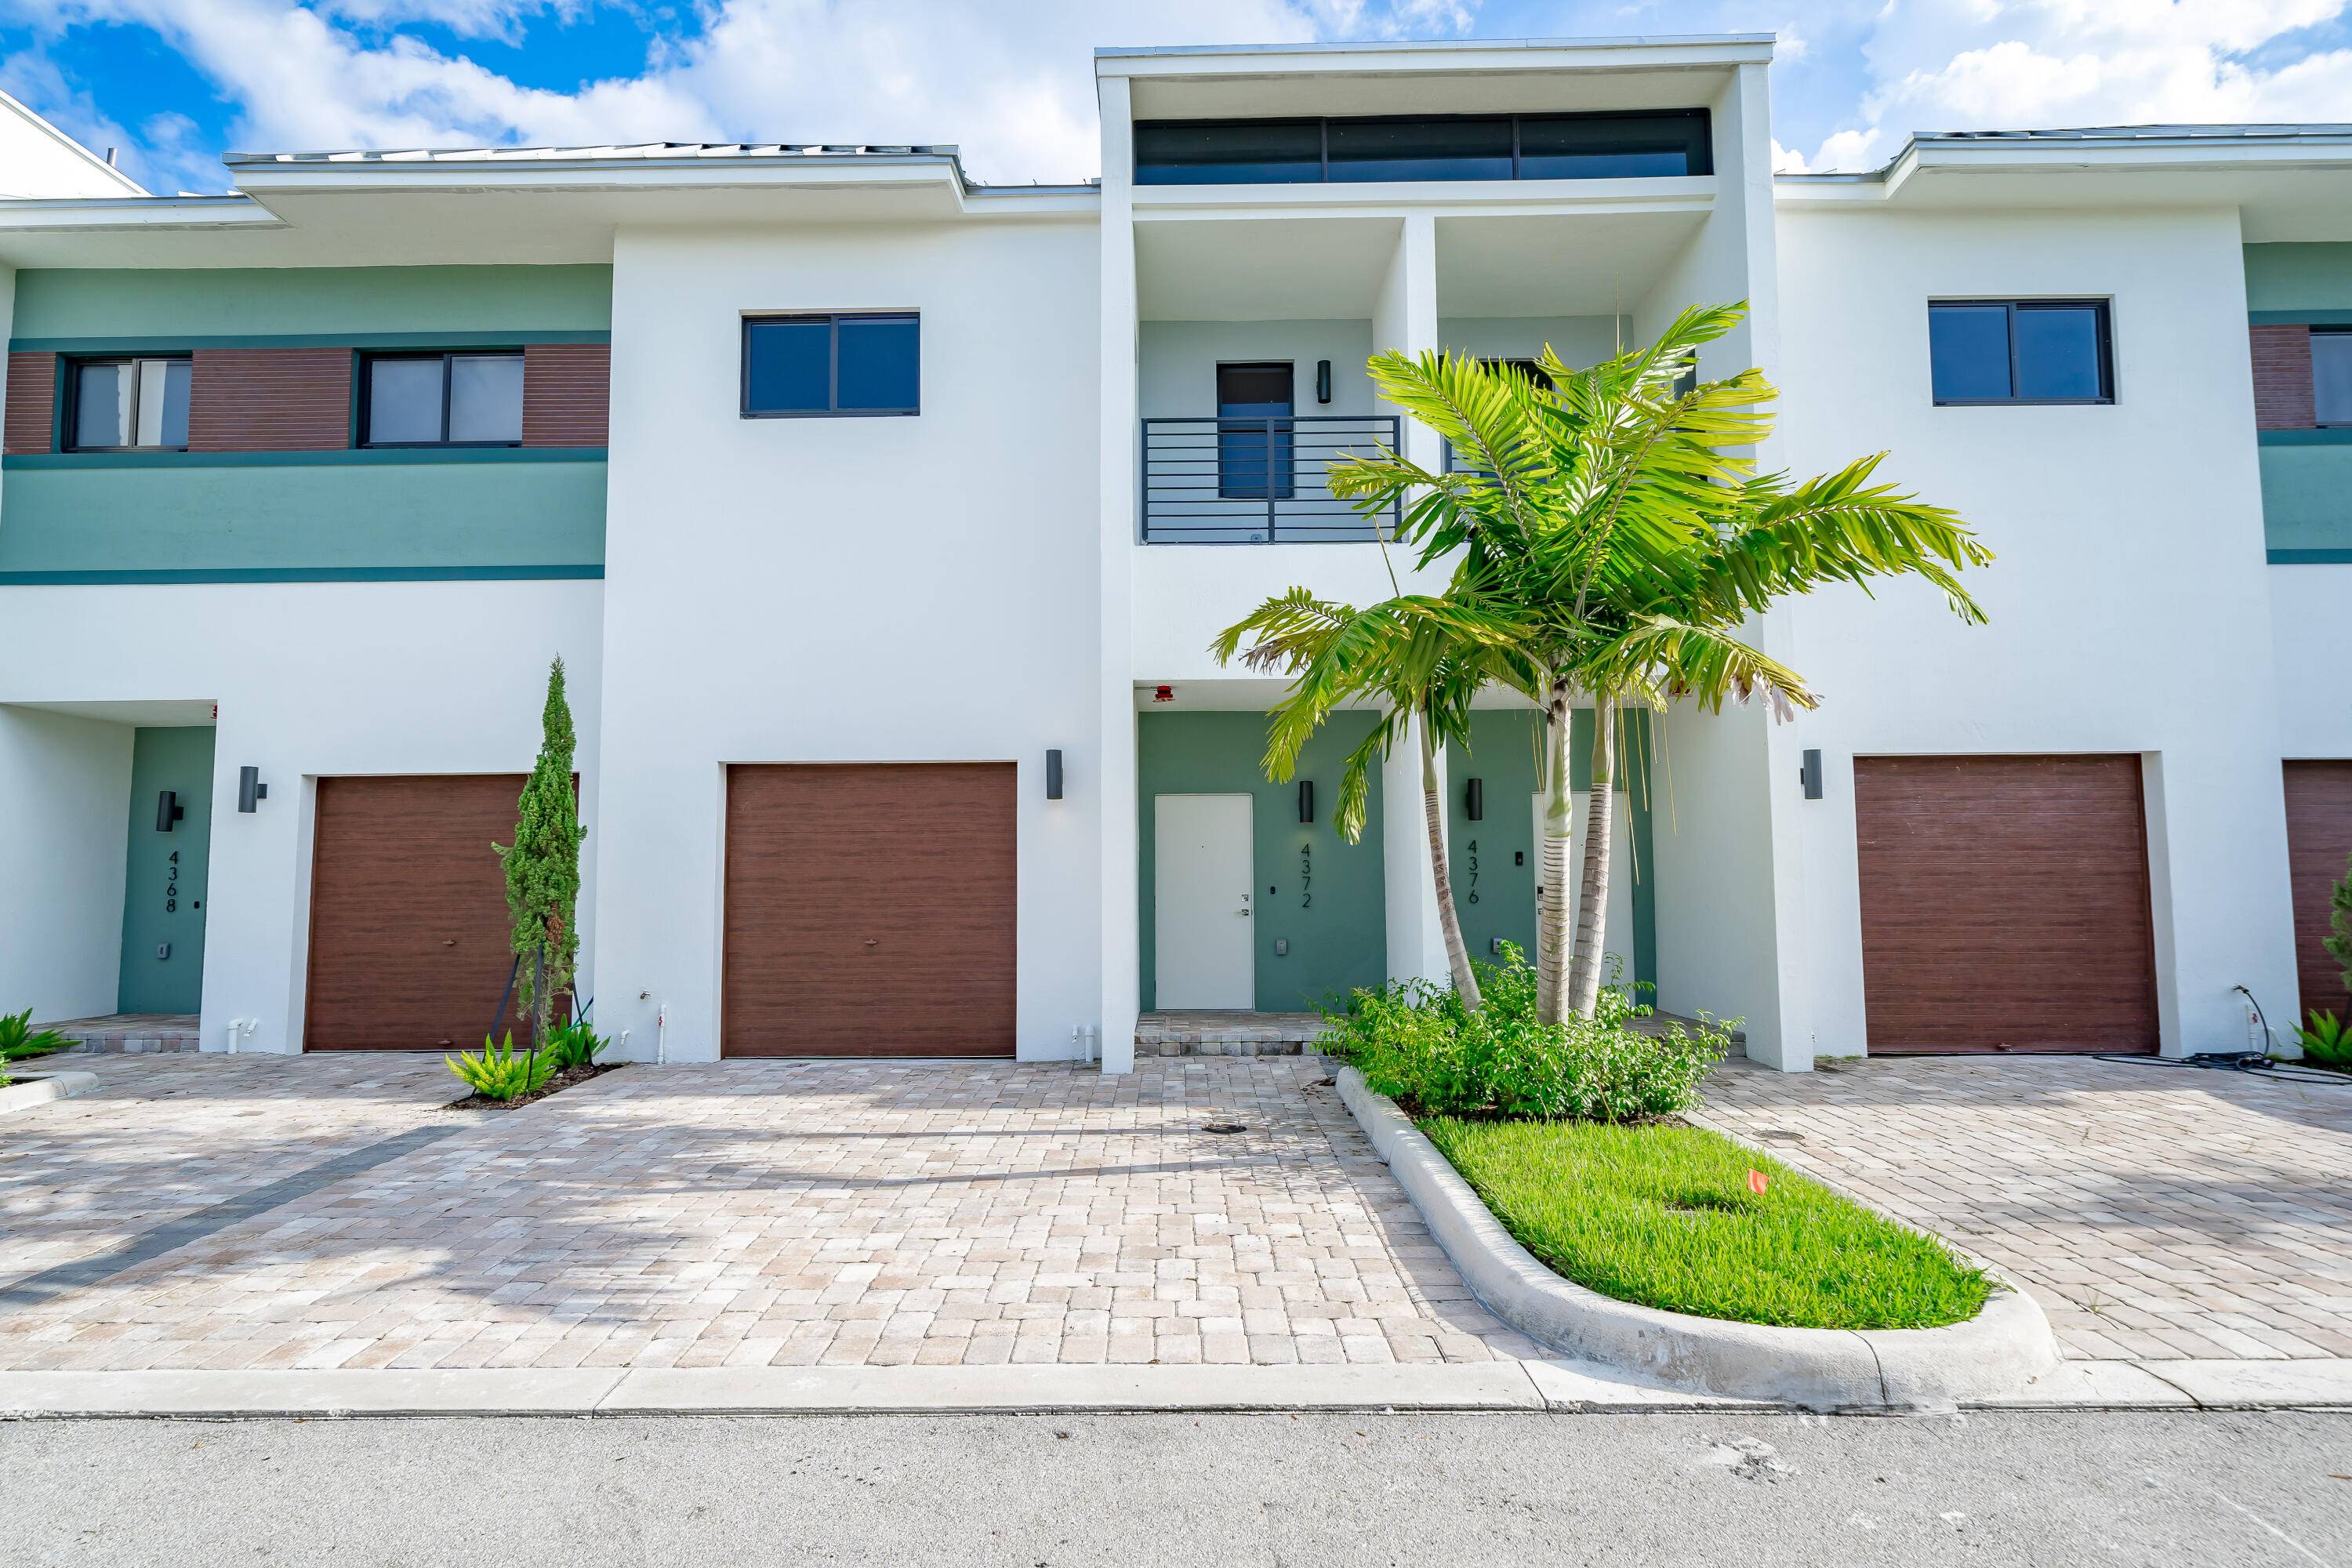 Contemporary Construction Hurricane Impact Windows Walking Distance to Community Dog Park Gated Community with Lake Views Welcome to Strata at Plantation !